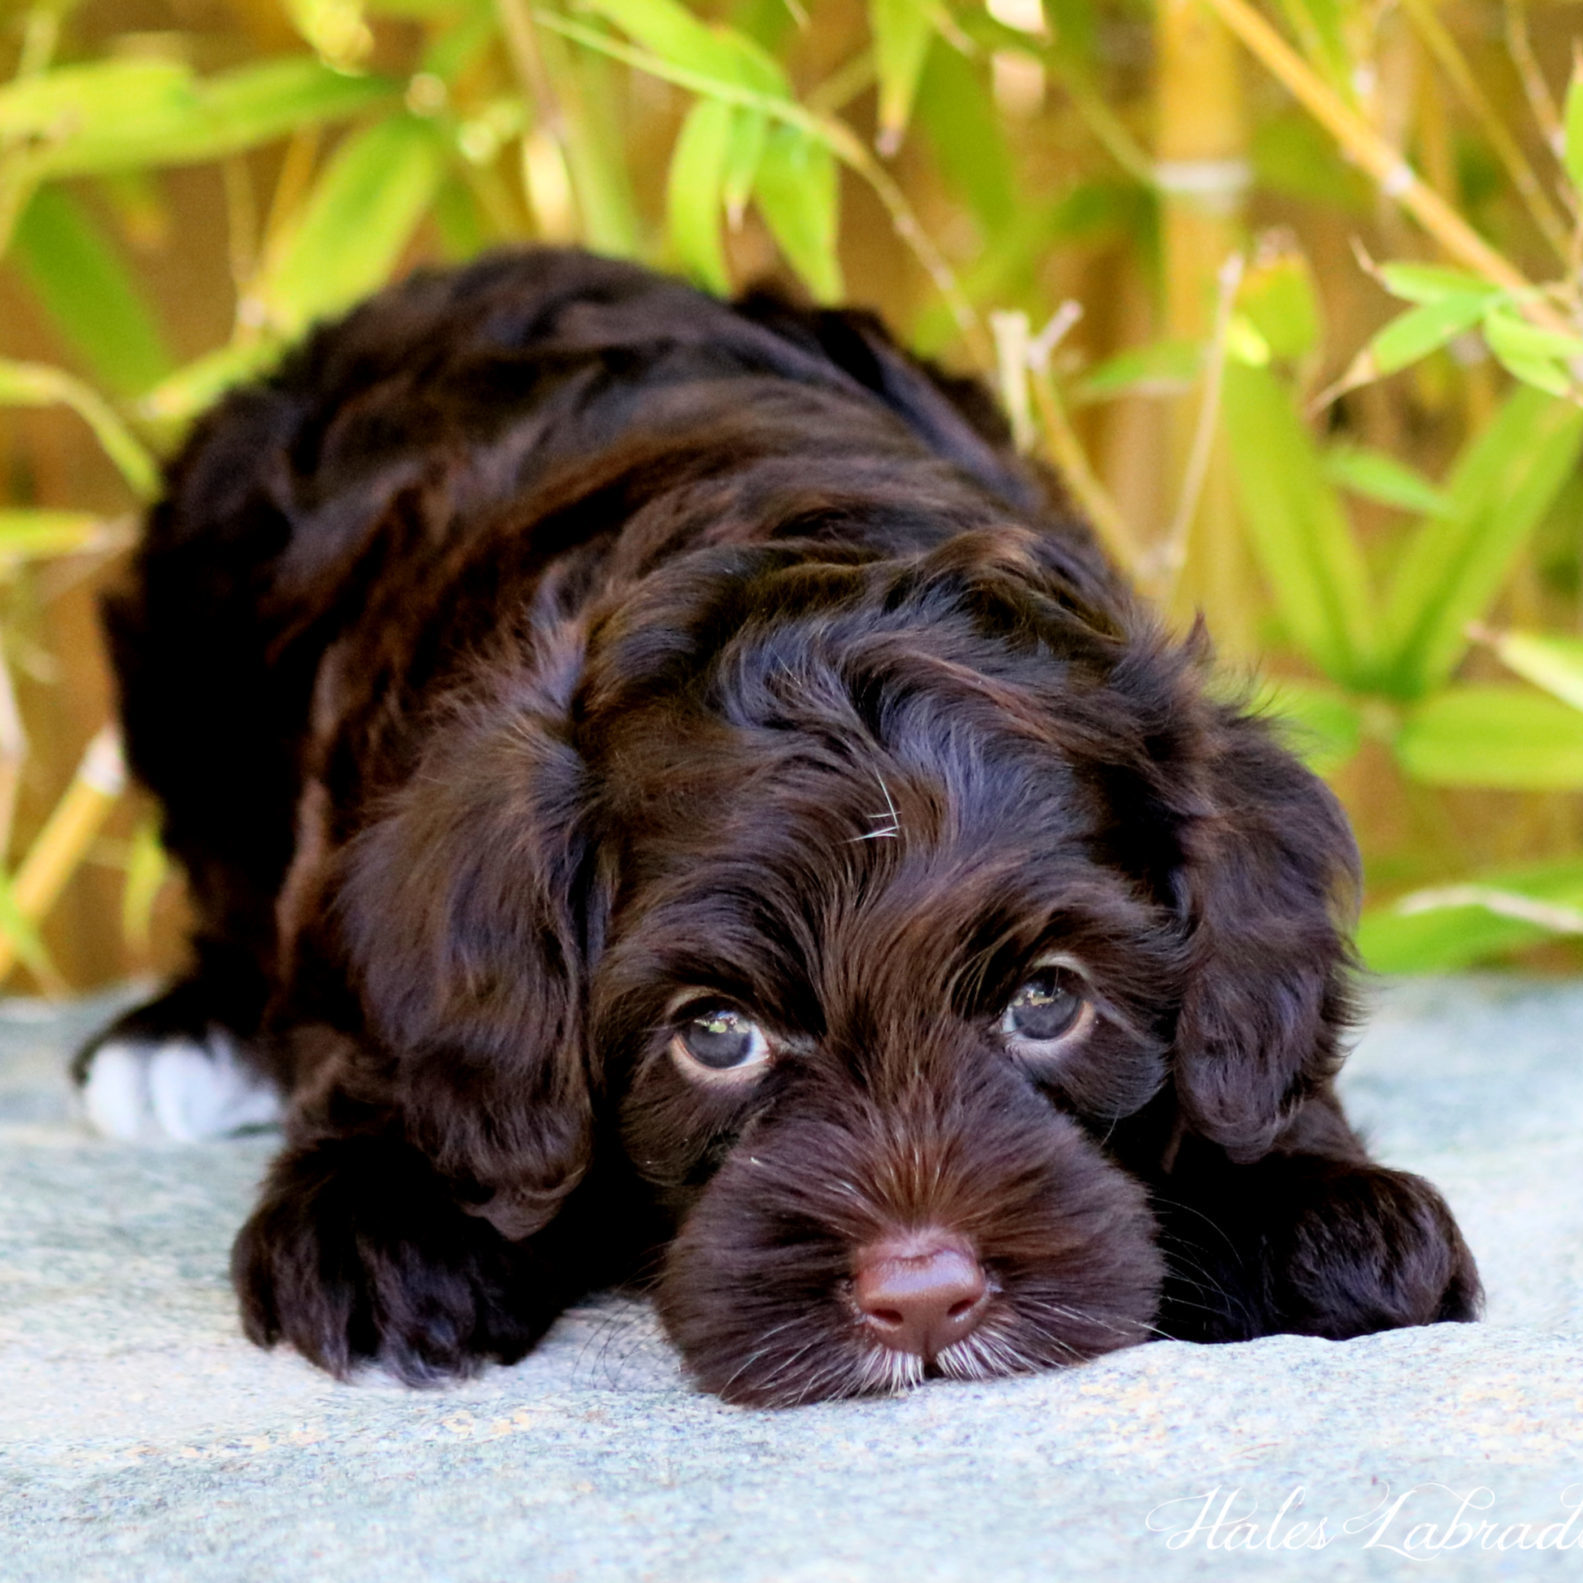 chocolate labradoodle puppies